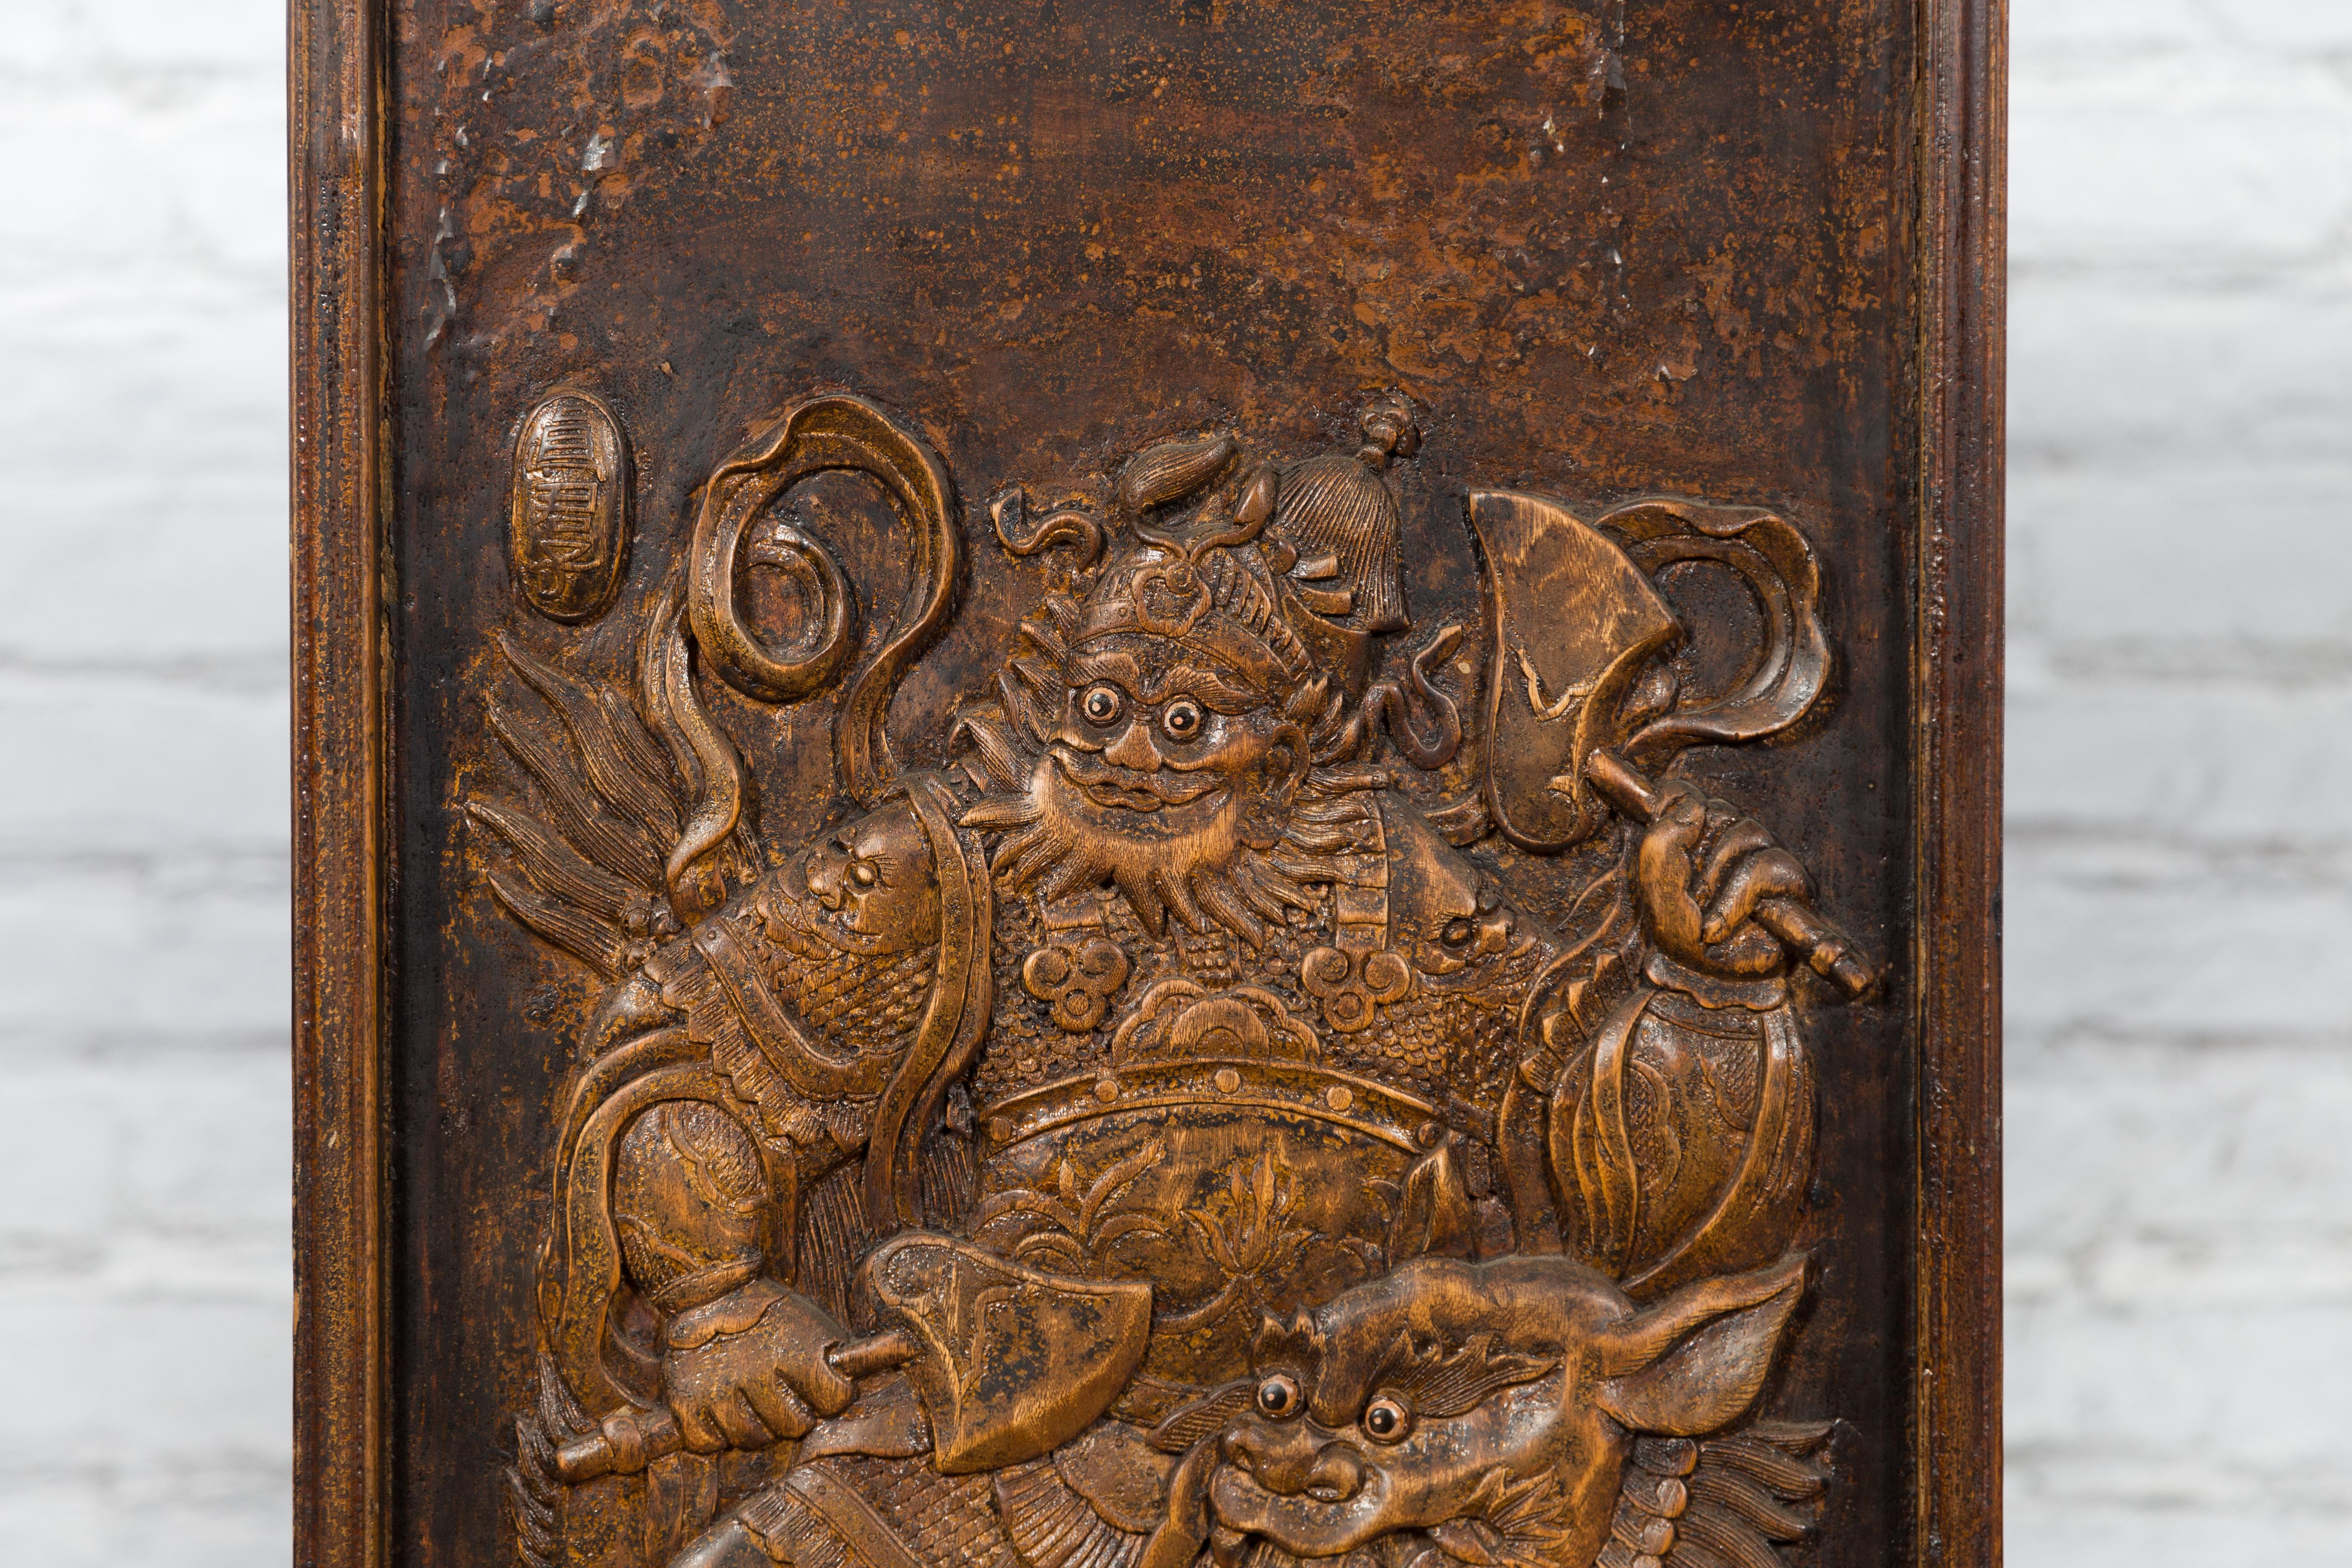 Chinese Zhejiang Vintage Low-Relief Wall Plaque Depicting a Celestial Guardian For Sale 1